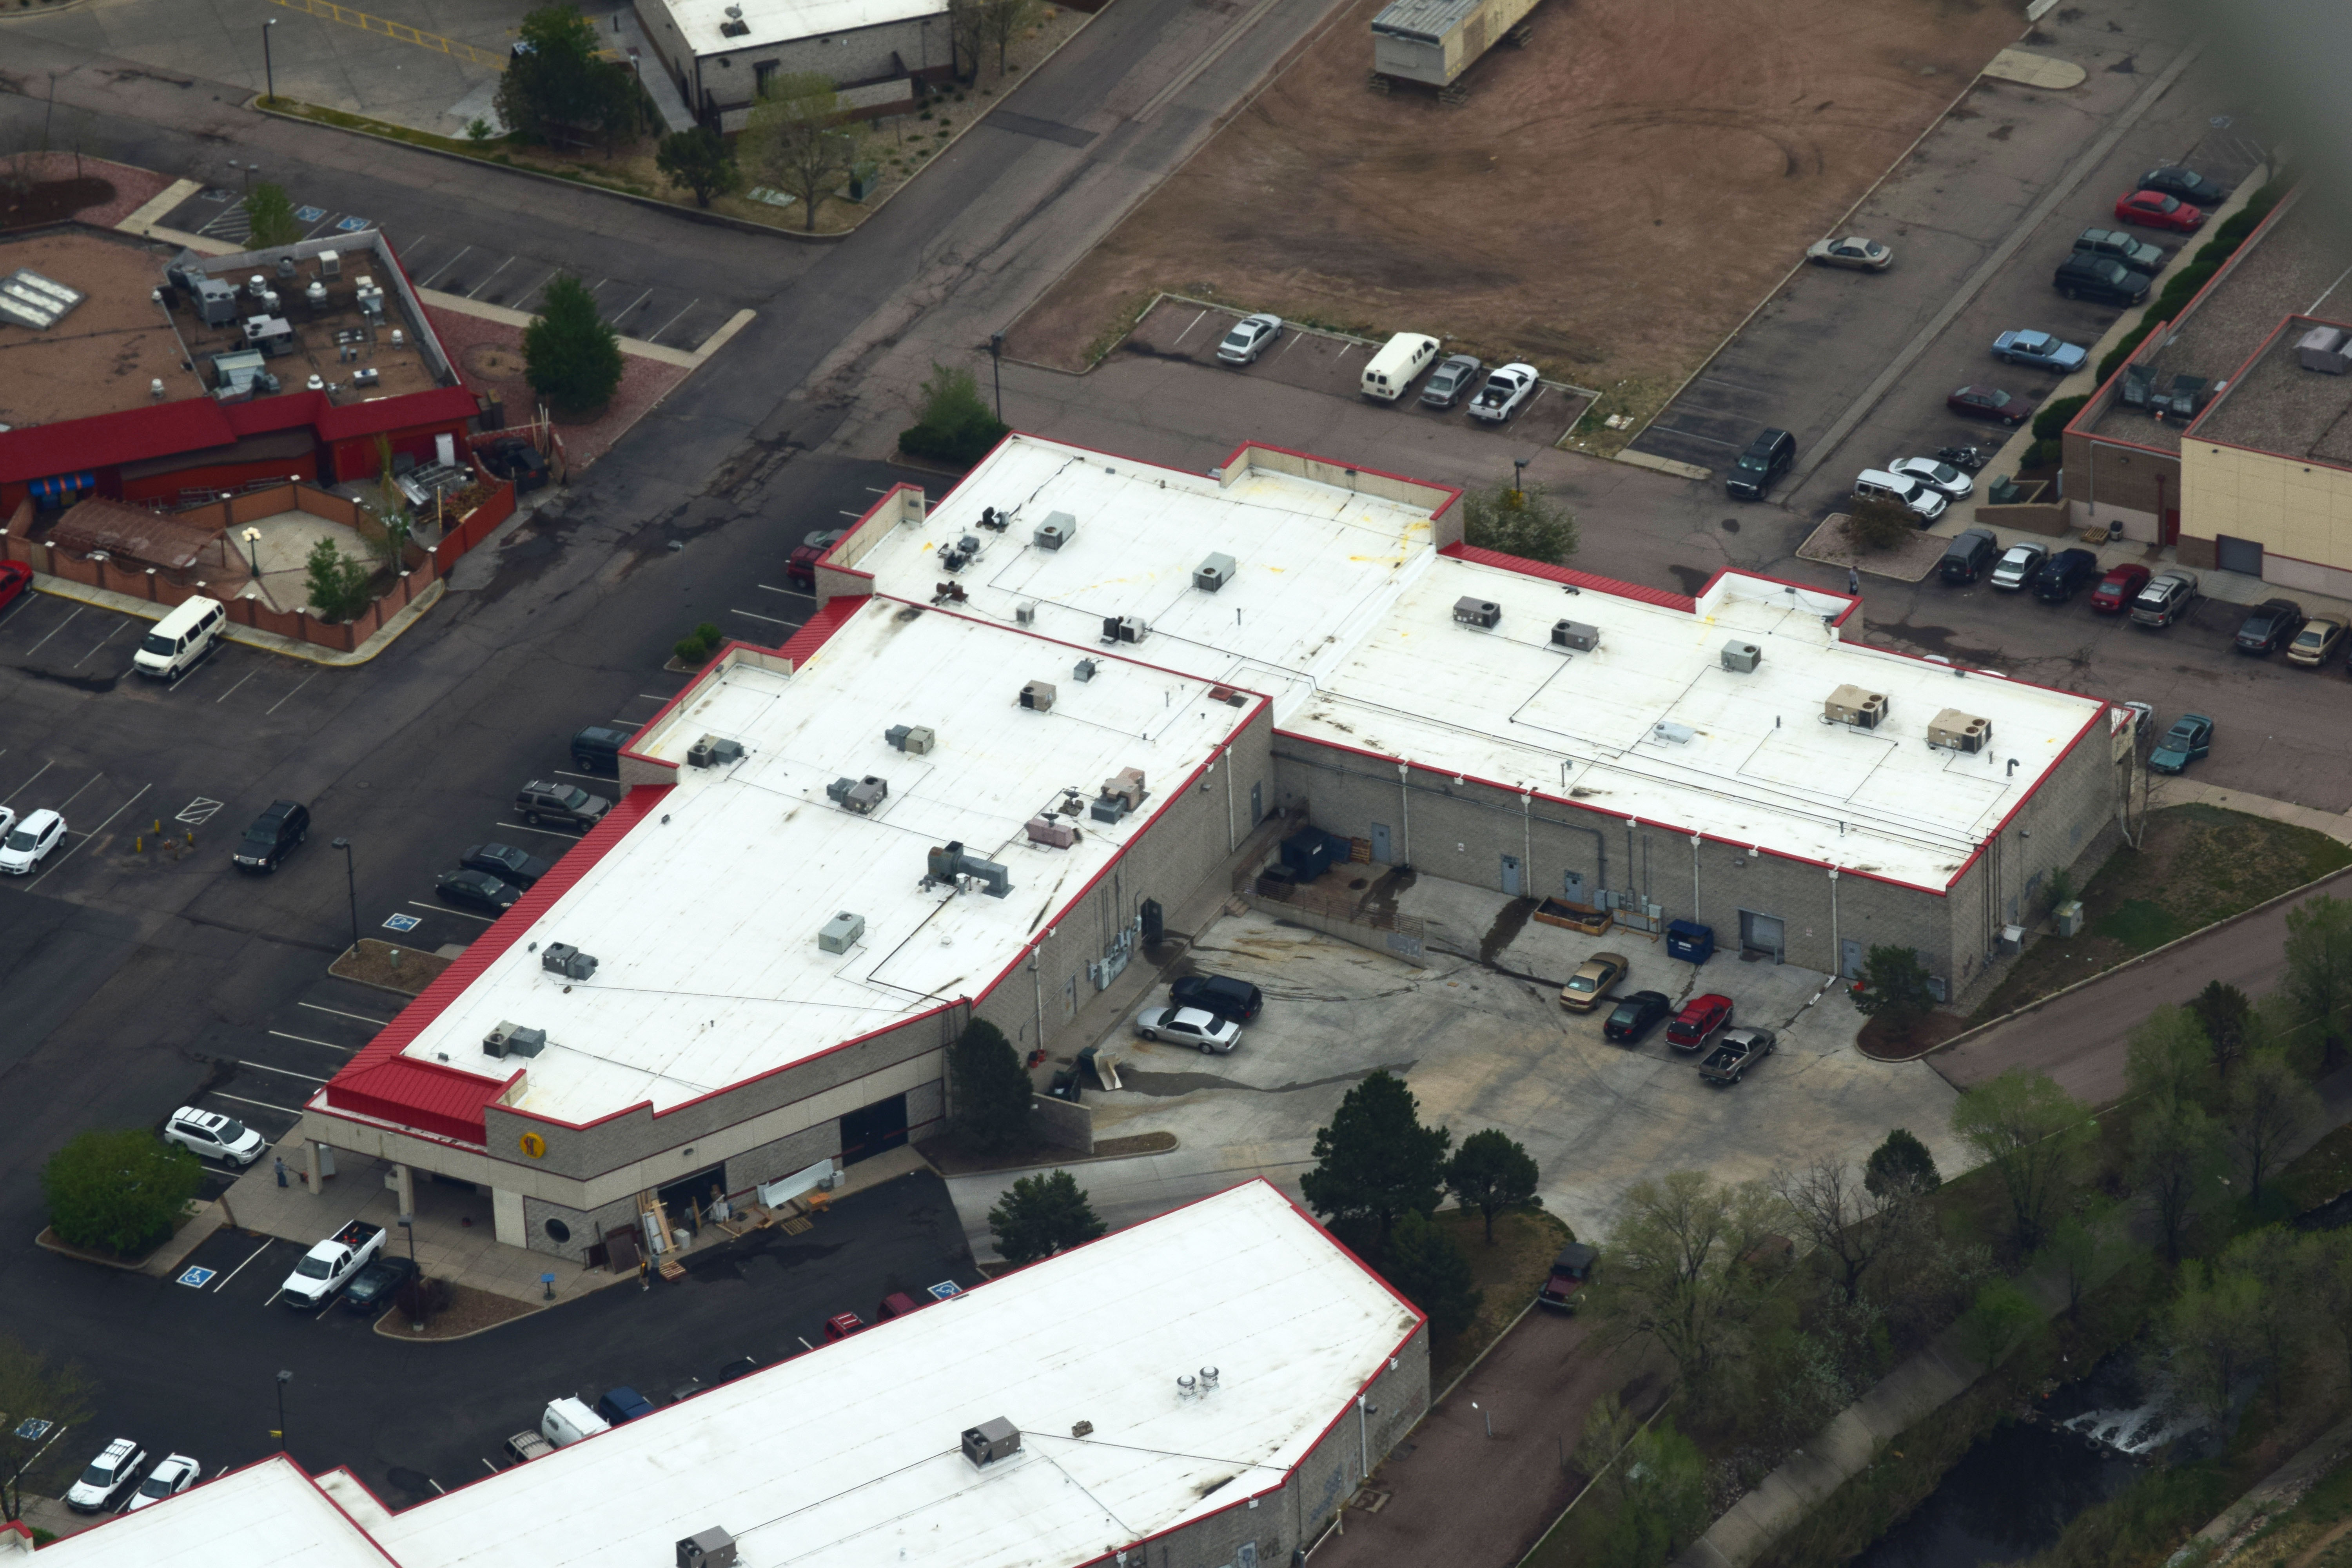 Commercial Roofing Image